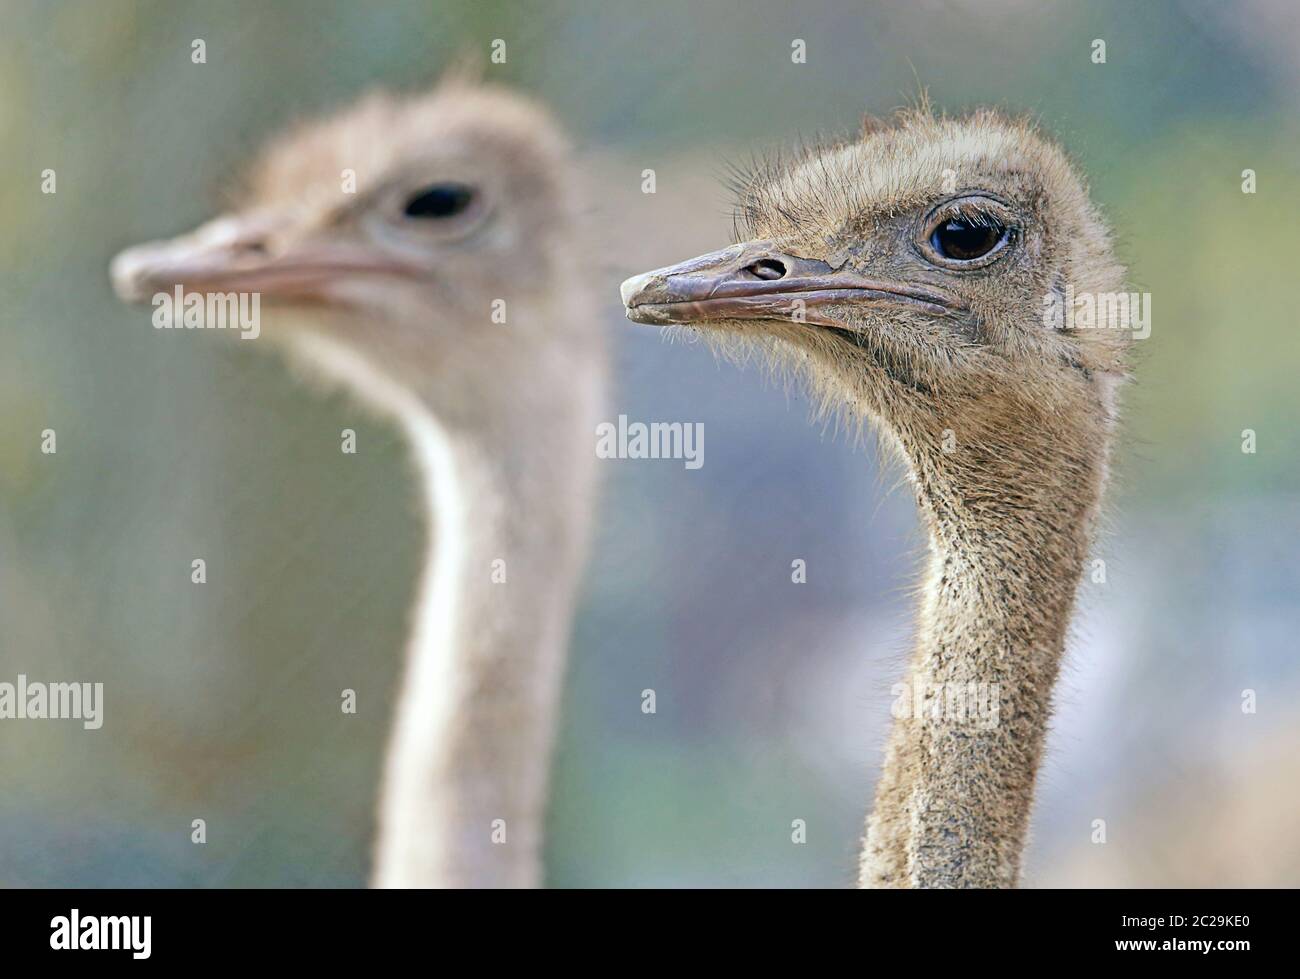 Two African ostriches Struthio camelus as a head study Stock Photo